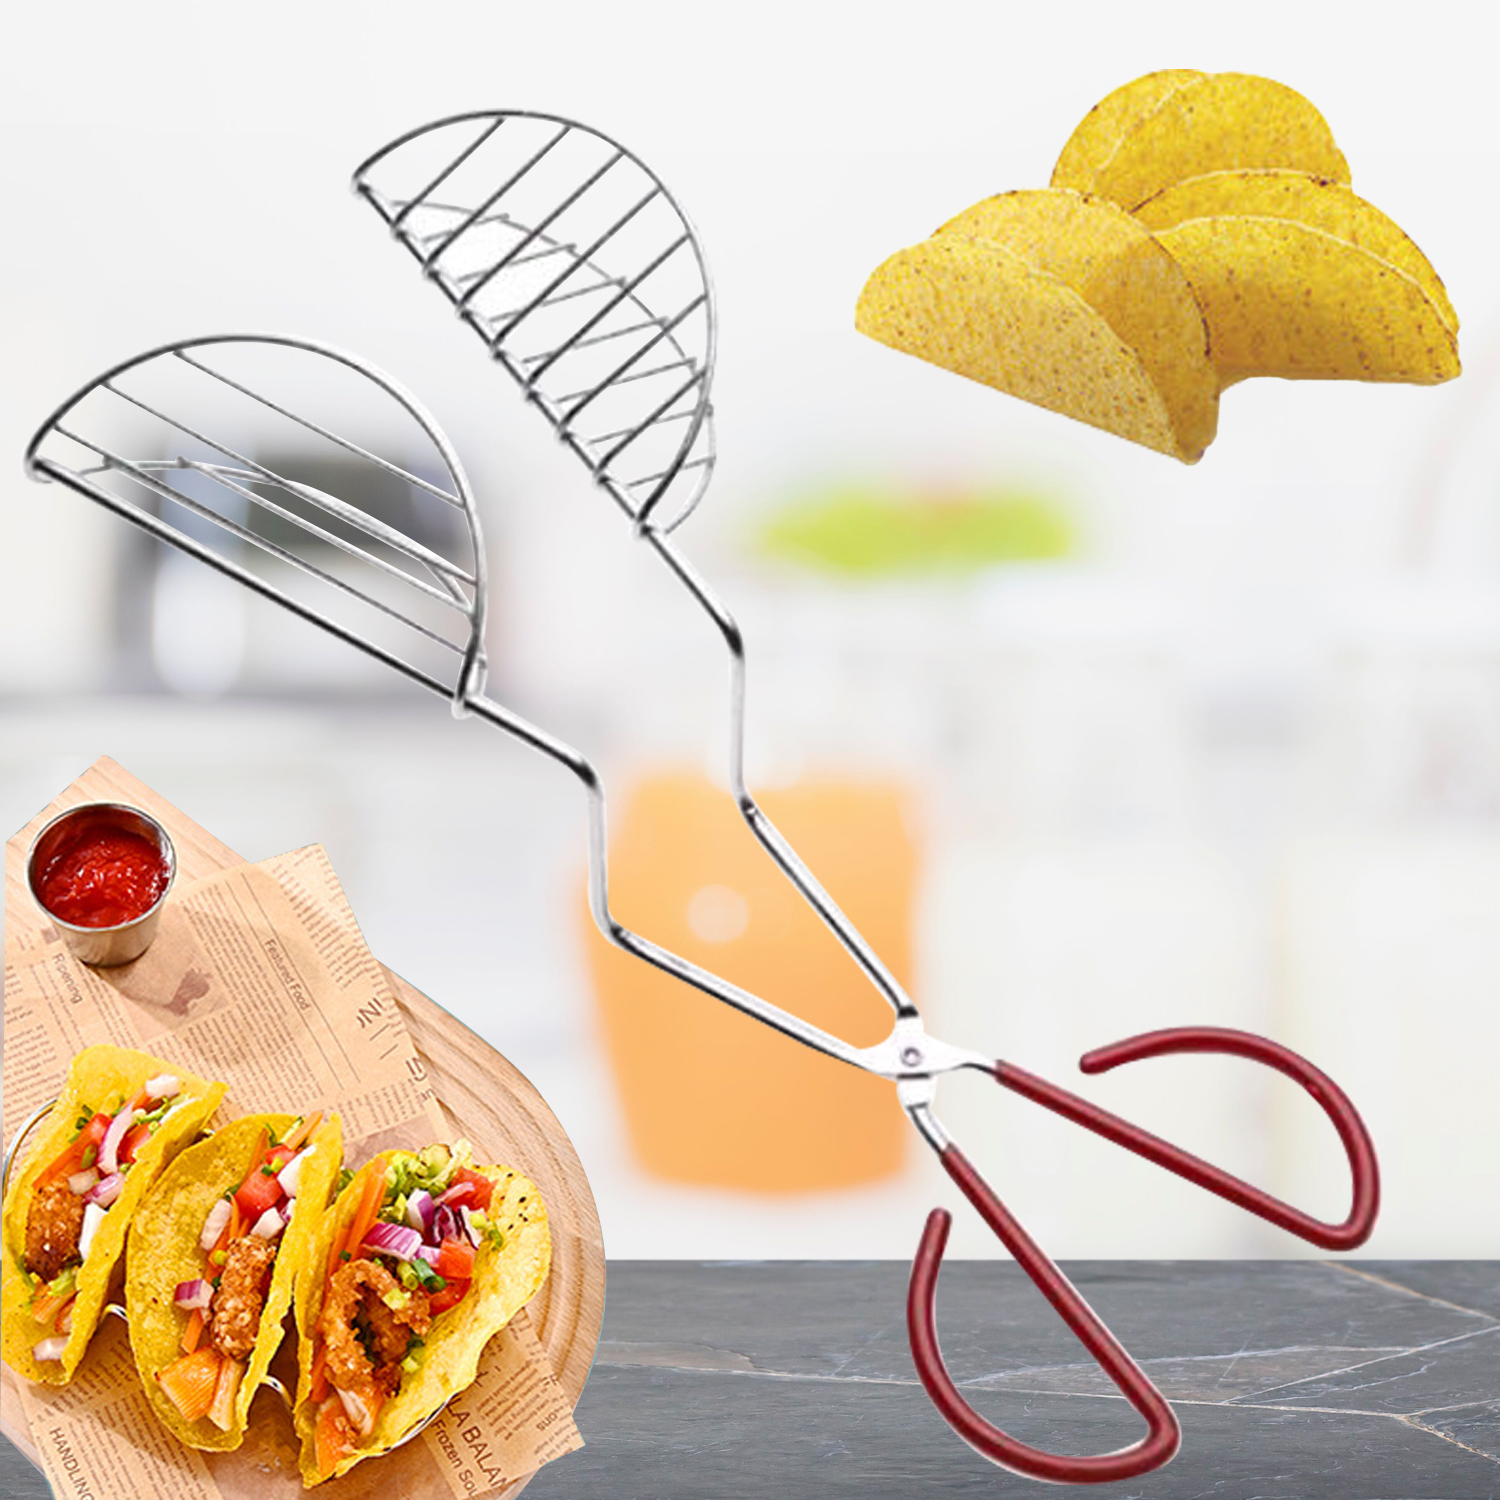 Taco Shell Maker Press Tortilla Fryer Tong Stainless Steel Holders, Tortilla Clip, Potato Chip Holder, Taco Tongs with Rubber Cover On Handle 